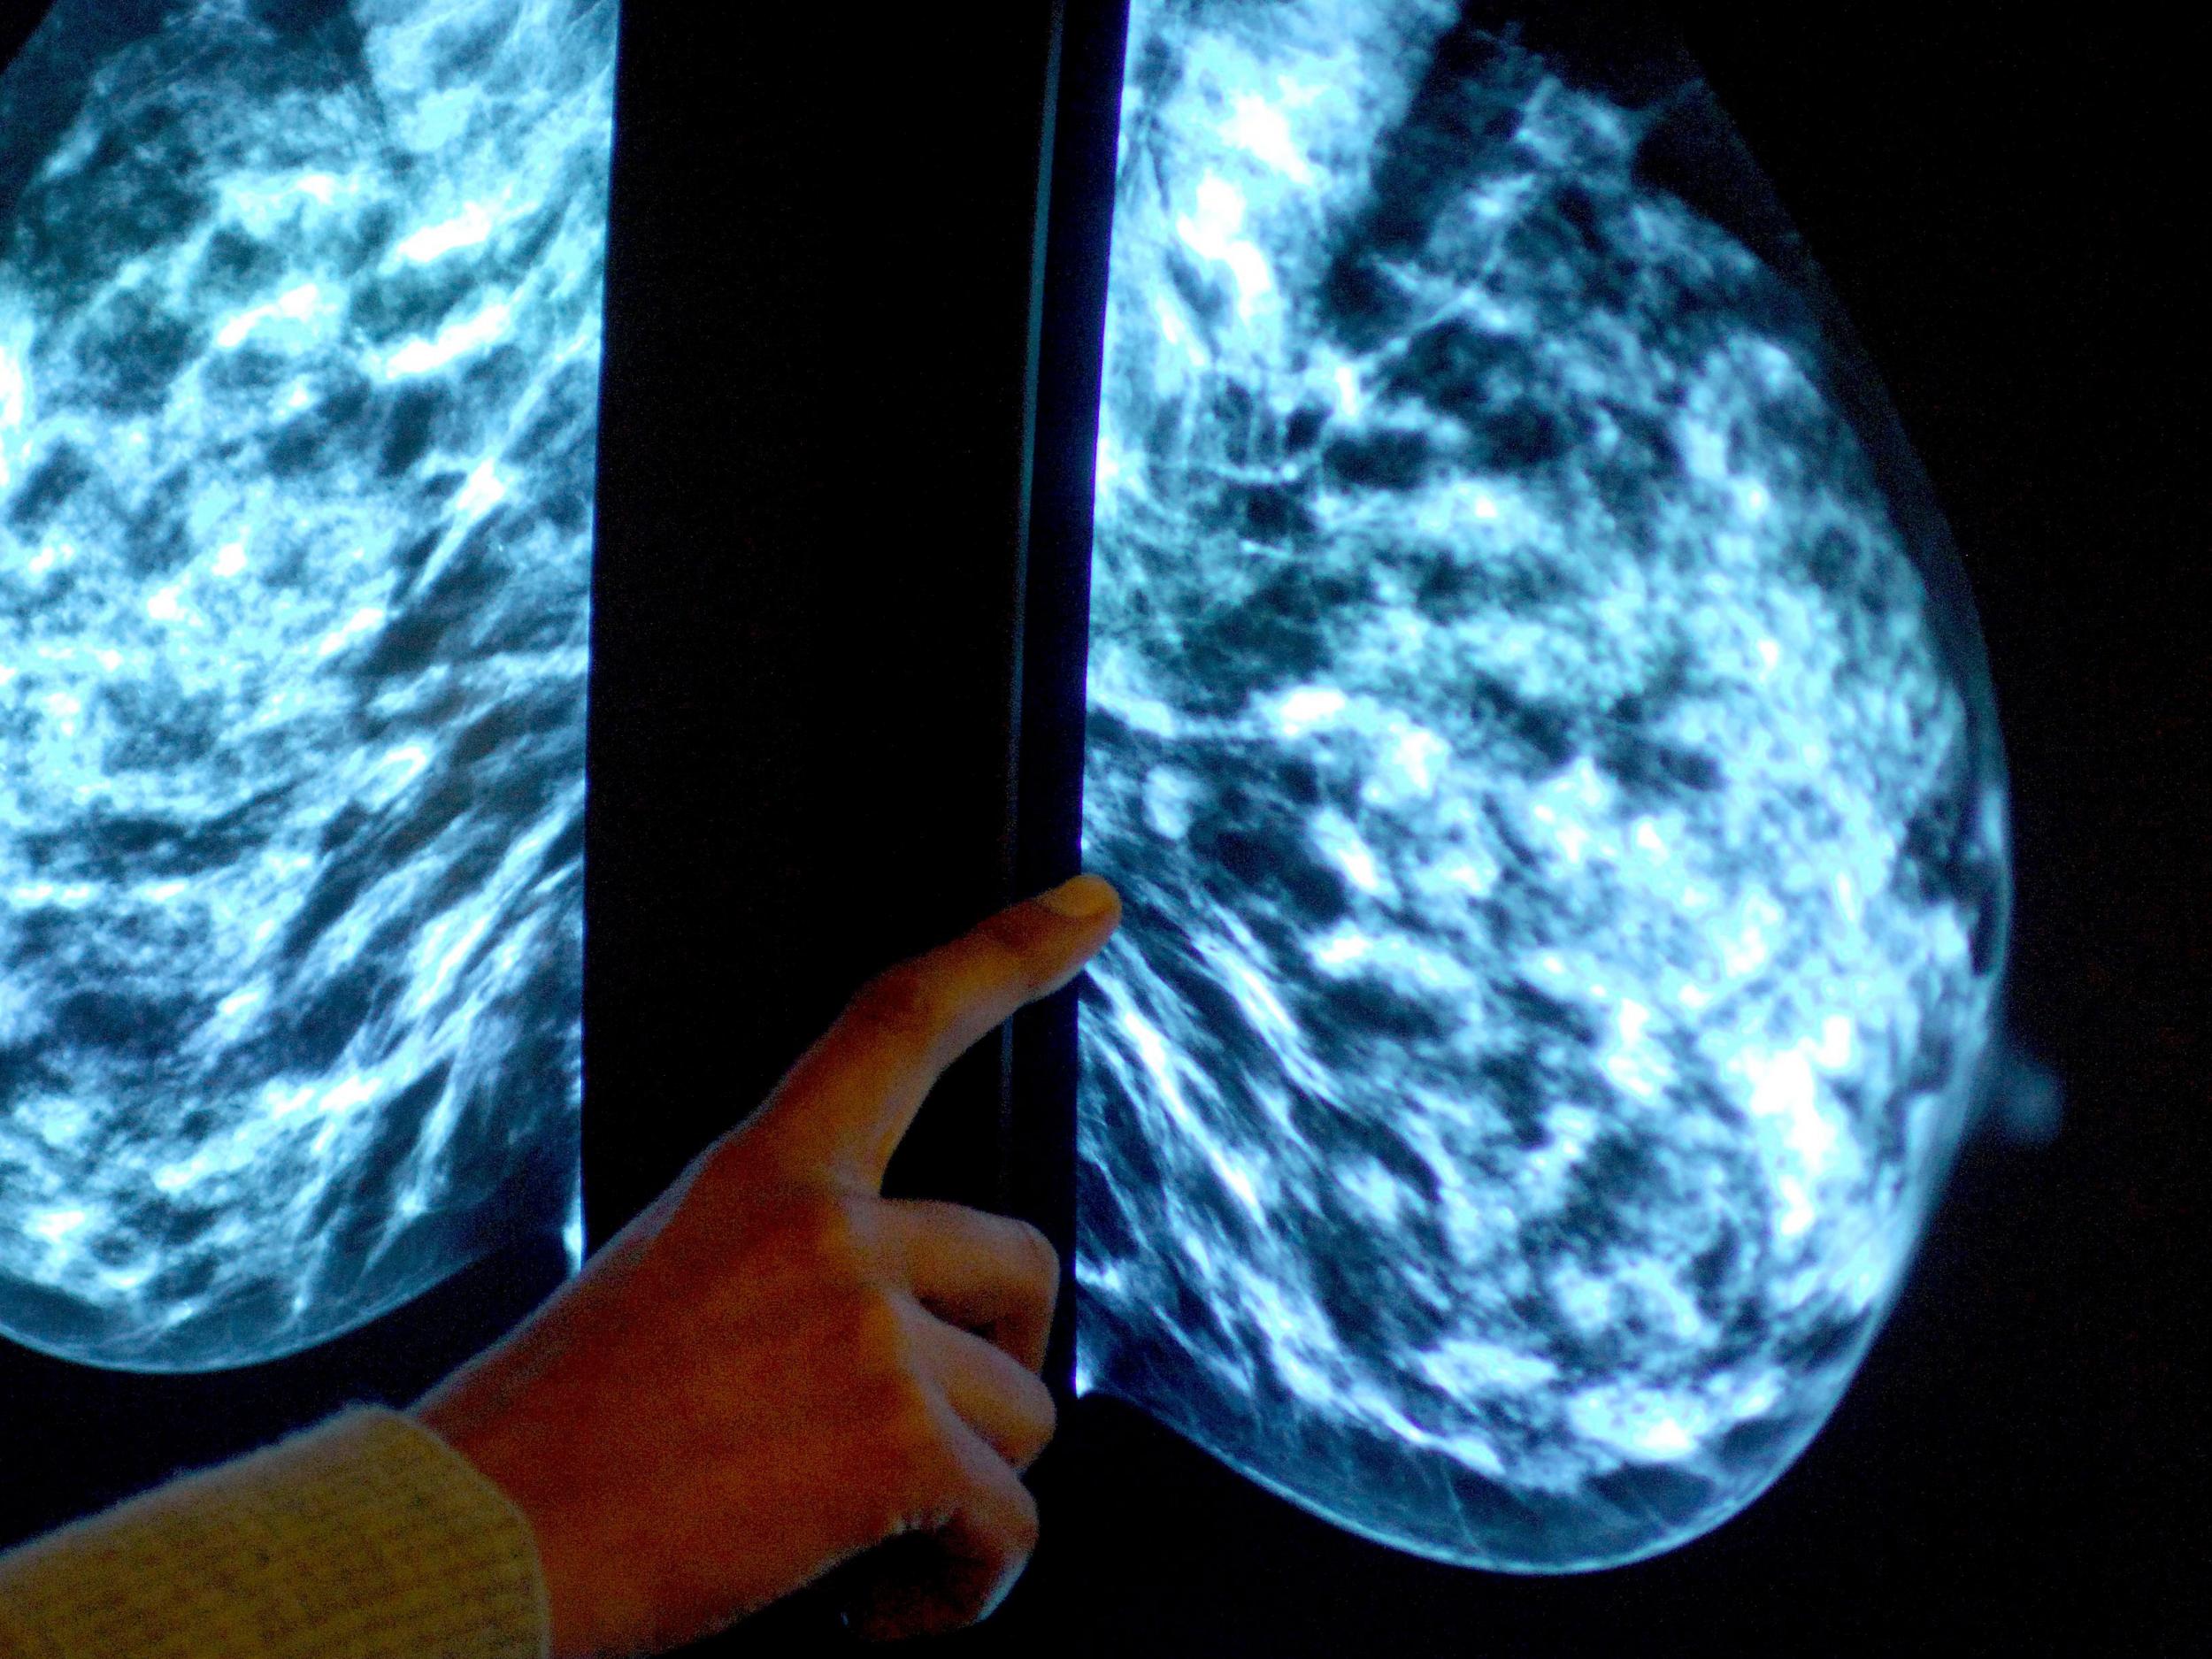 Results could be used to tailor follow up mammograms and treatment to periods when cancer is at risk of returning